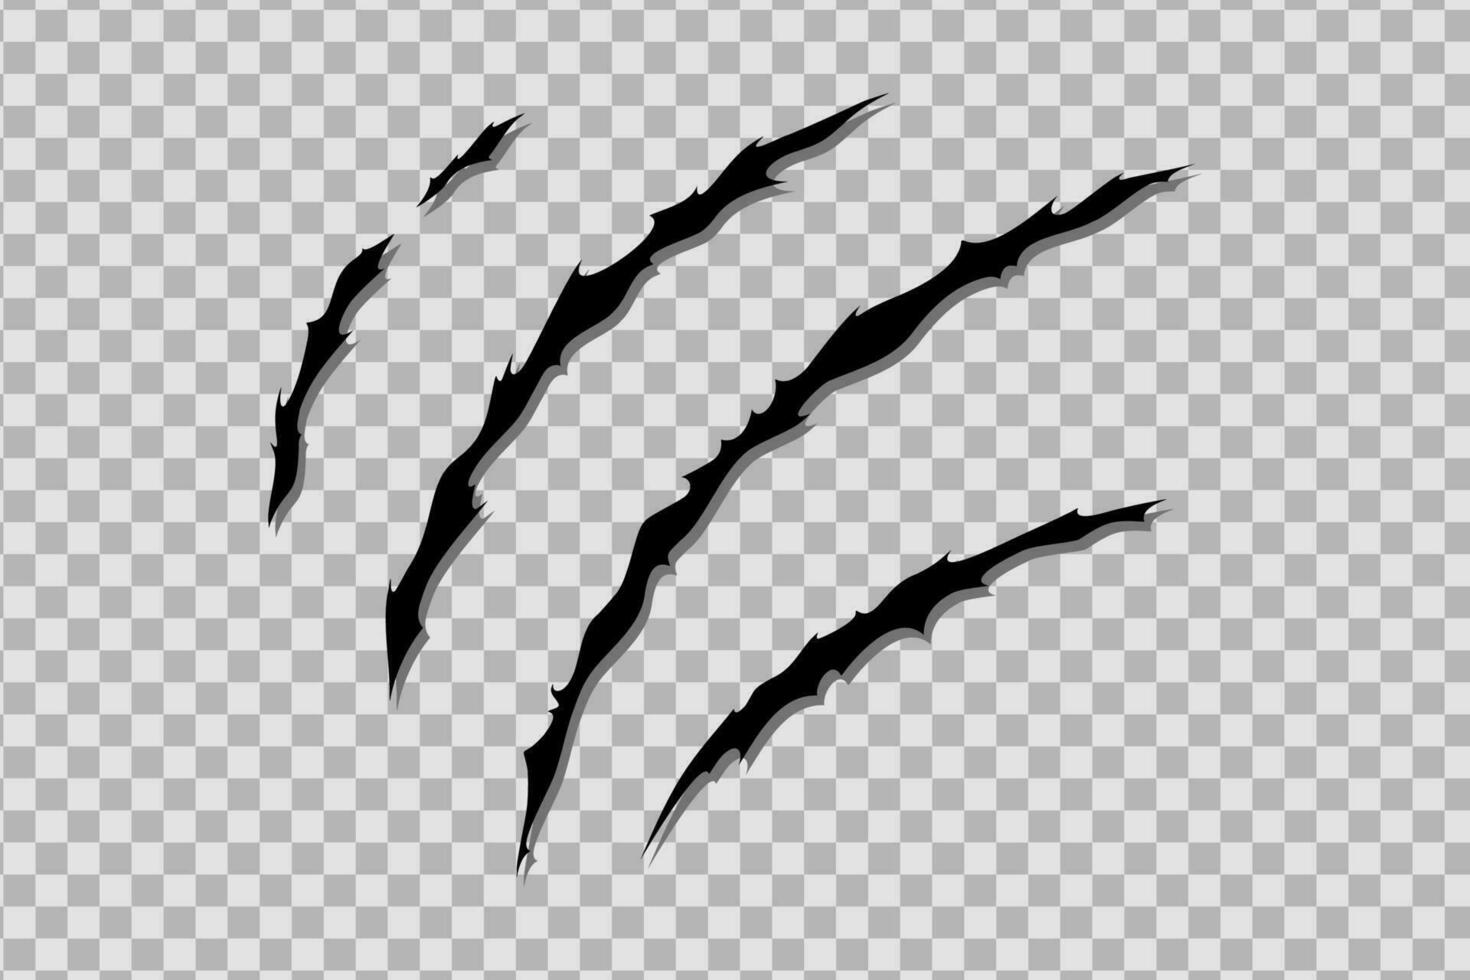 Claw scratches of wild animal. Cat scratches marks isolated. Vector illustration